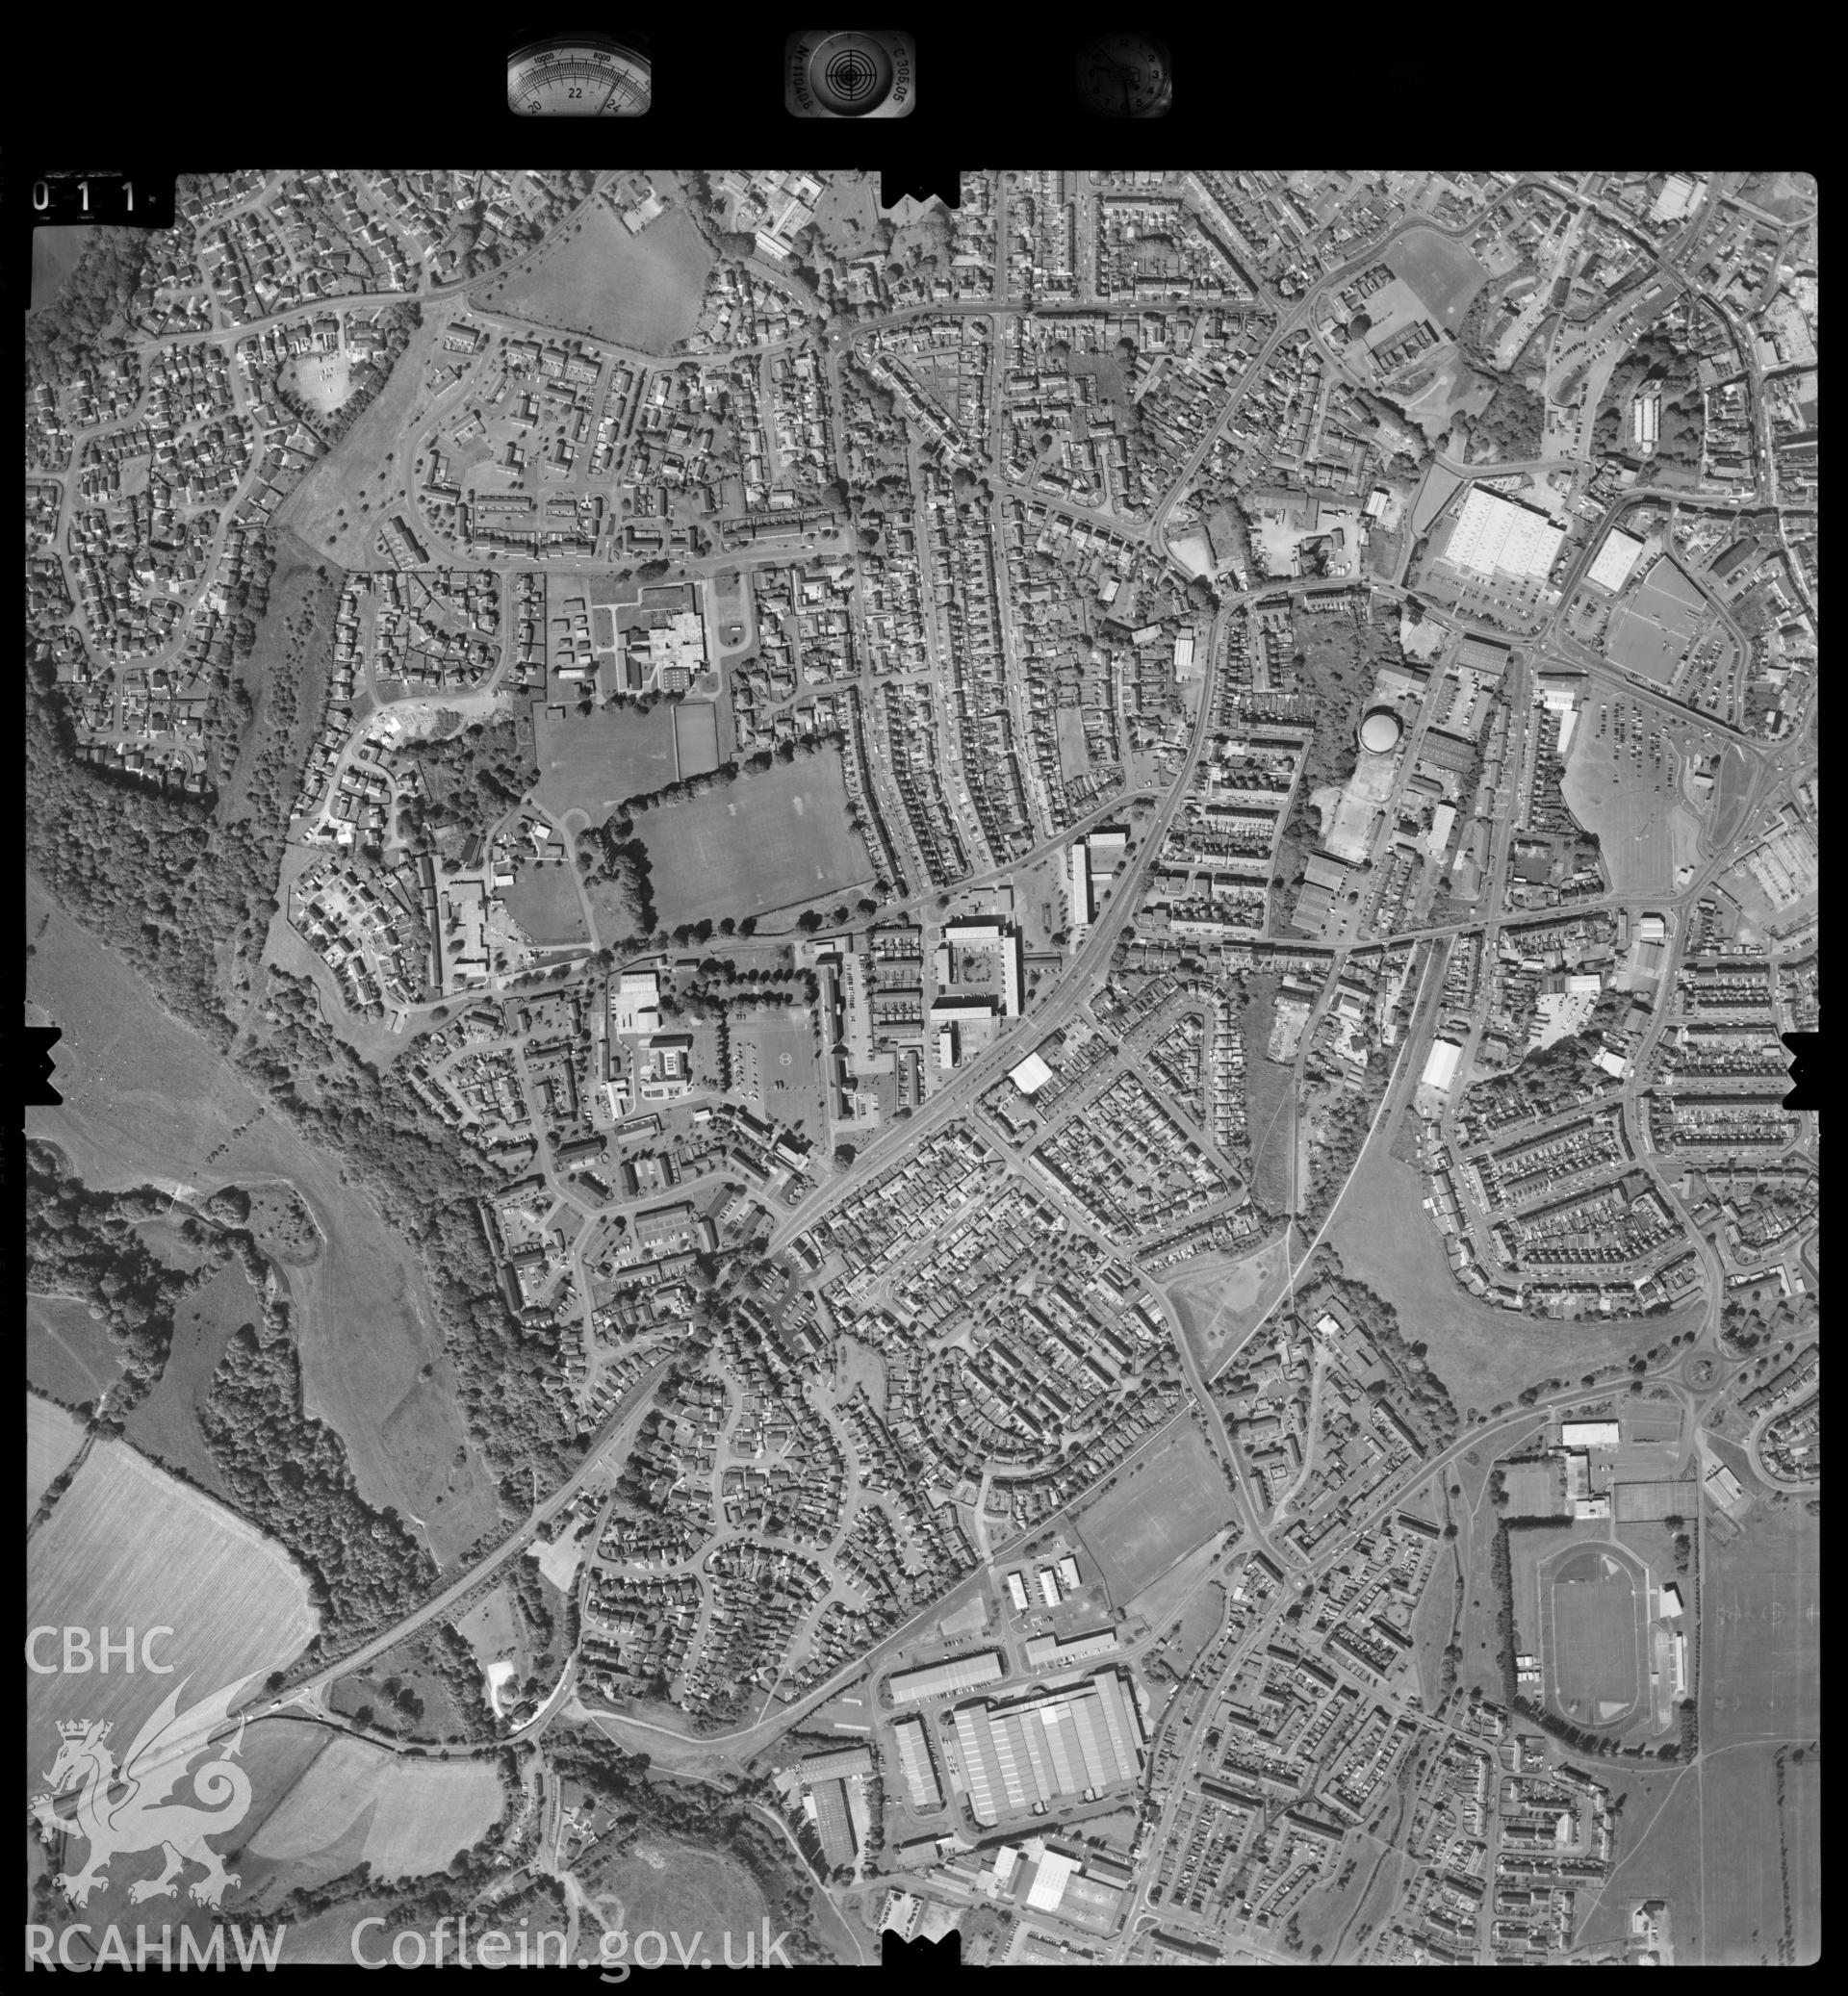 Digitized copy of an aerial photograph showing the Hightown area of  Wrexham, taken by Ordnance Survey, 1997.